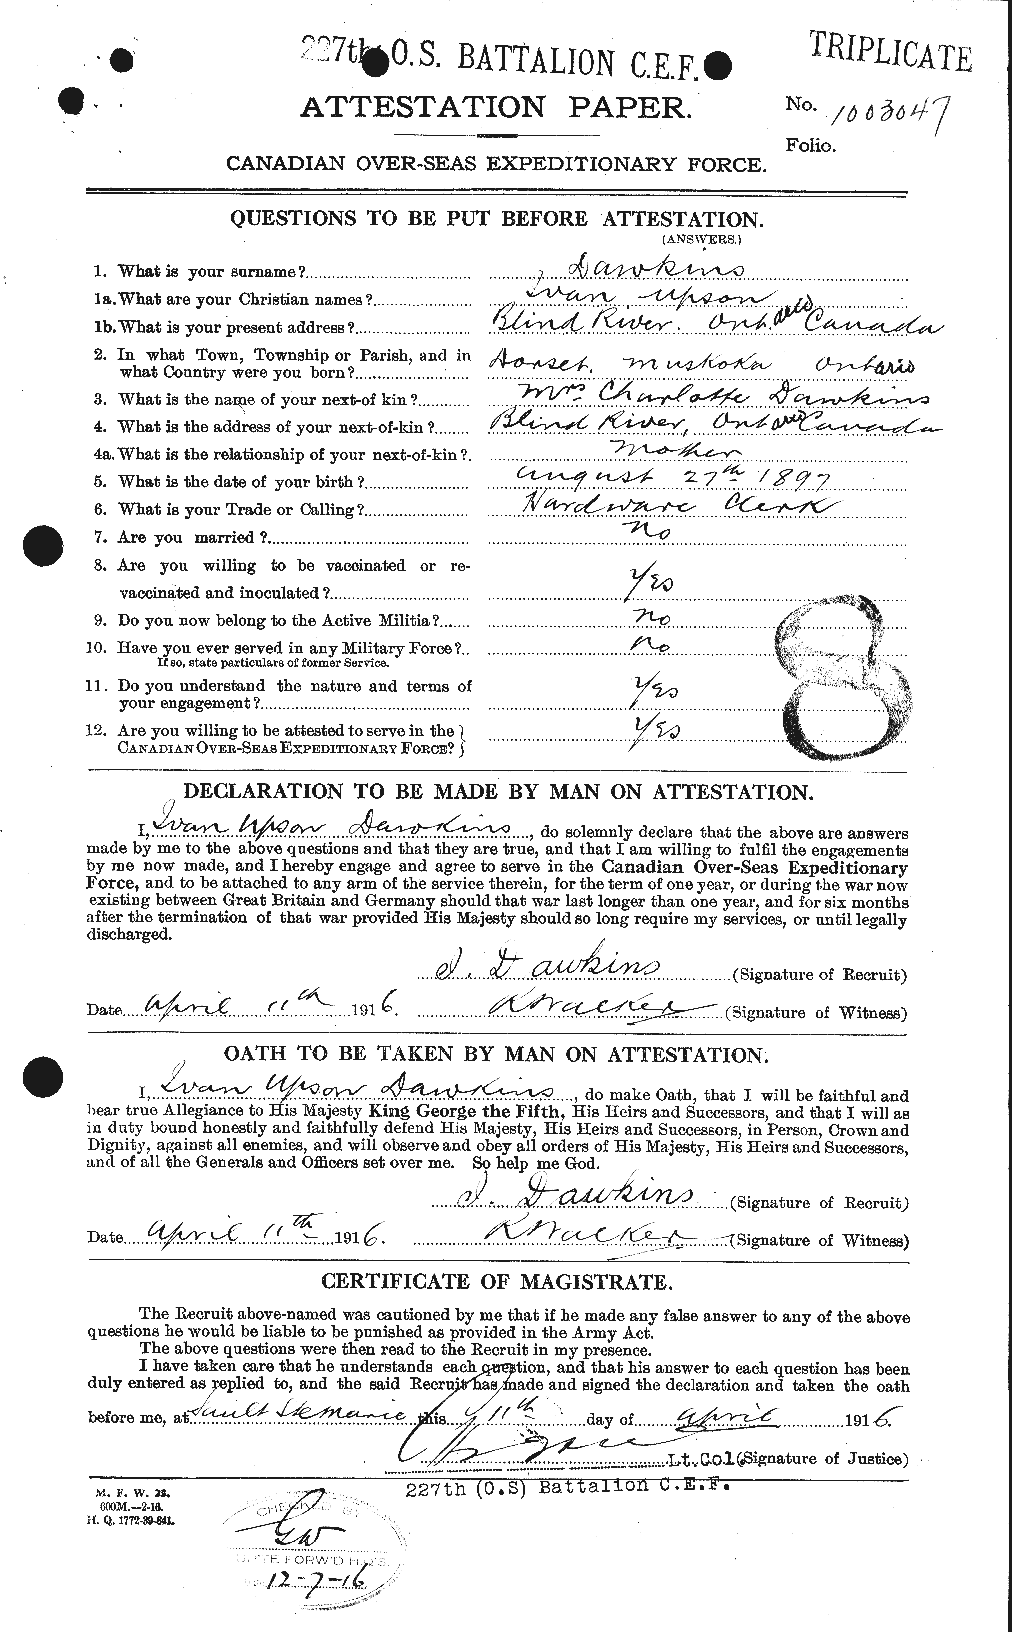 Personnel Records of the First World War - CEF 283132a